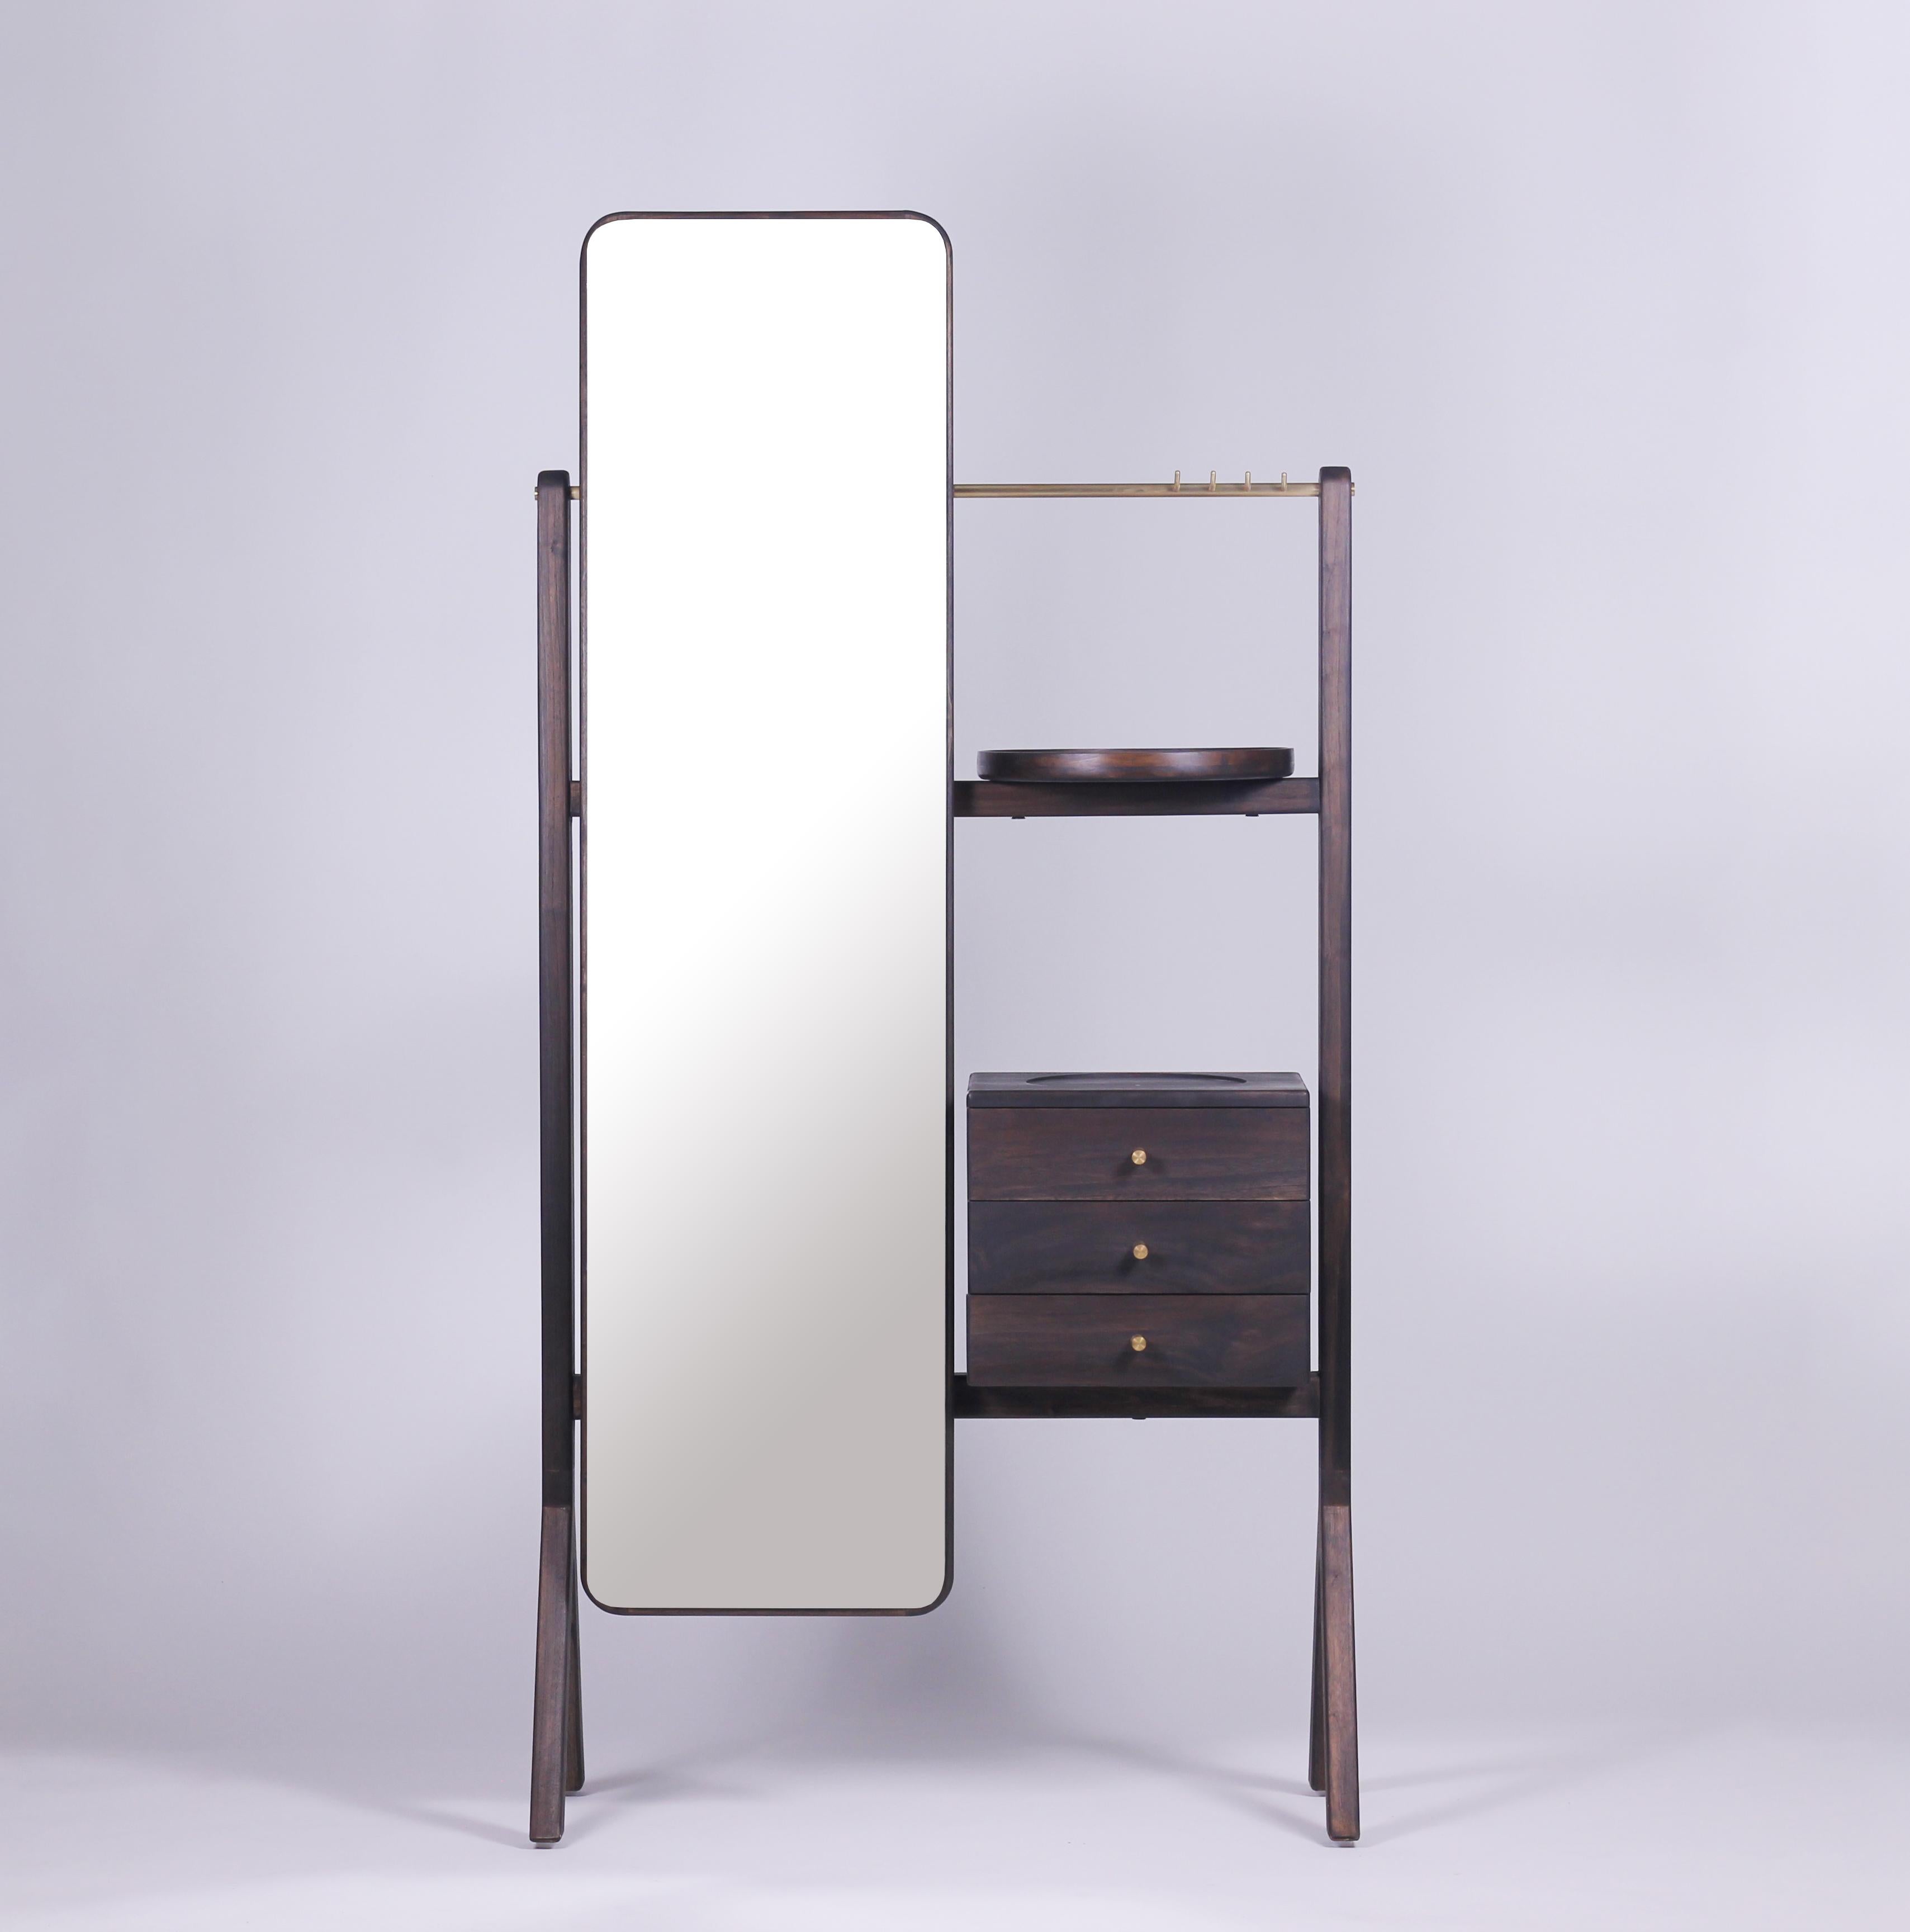 Cleopatra is a vanity dressing table in solid oak with a full length mirror, designed for bedrooms and walk-in wardrobes. Achieving a perfect balance between aesthetics and function, the design of Cleopatra aims to promote an inspiring and elevated